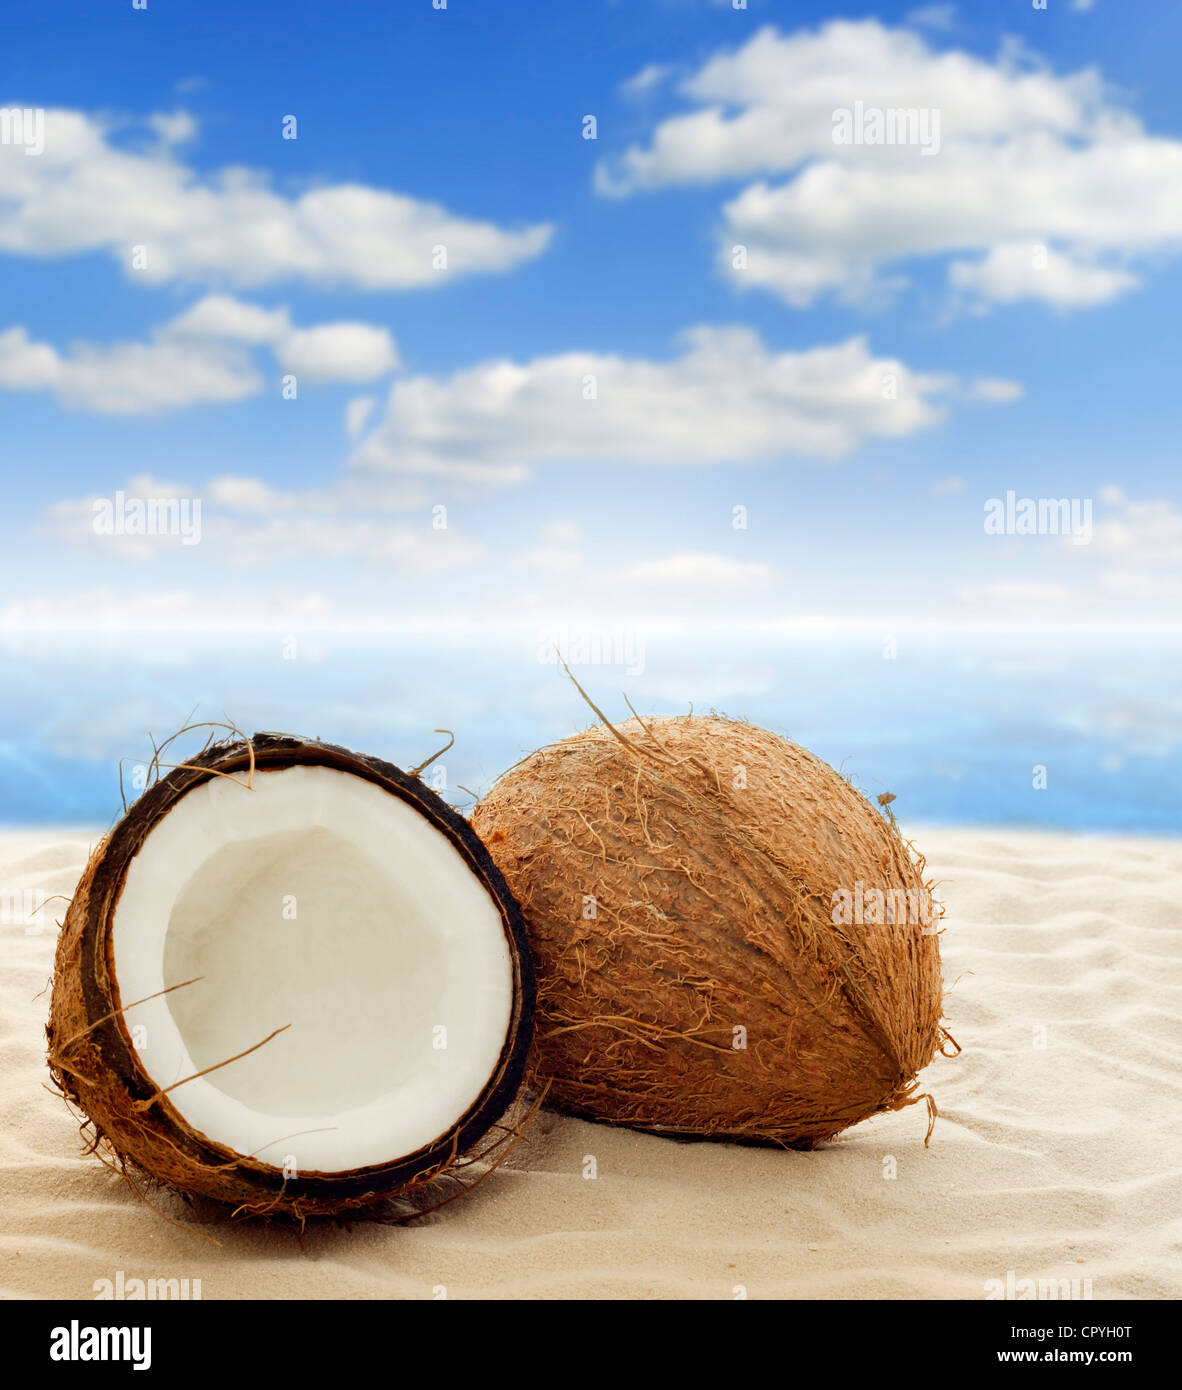 Coconut details on the beach against blue sky and sea Stock Photo